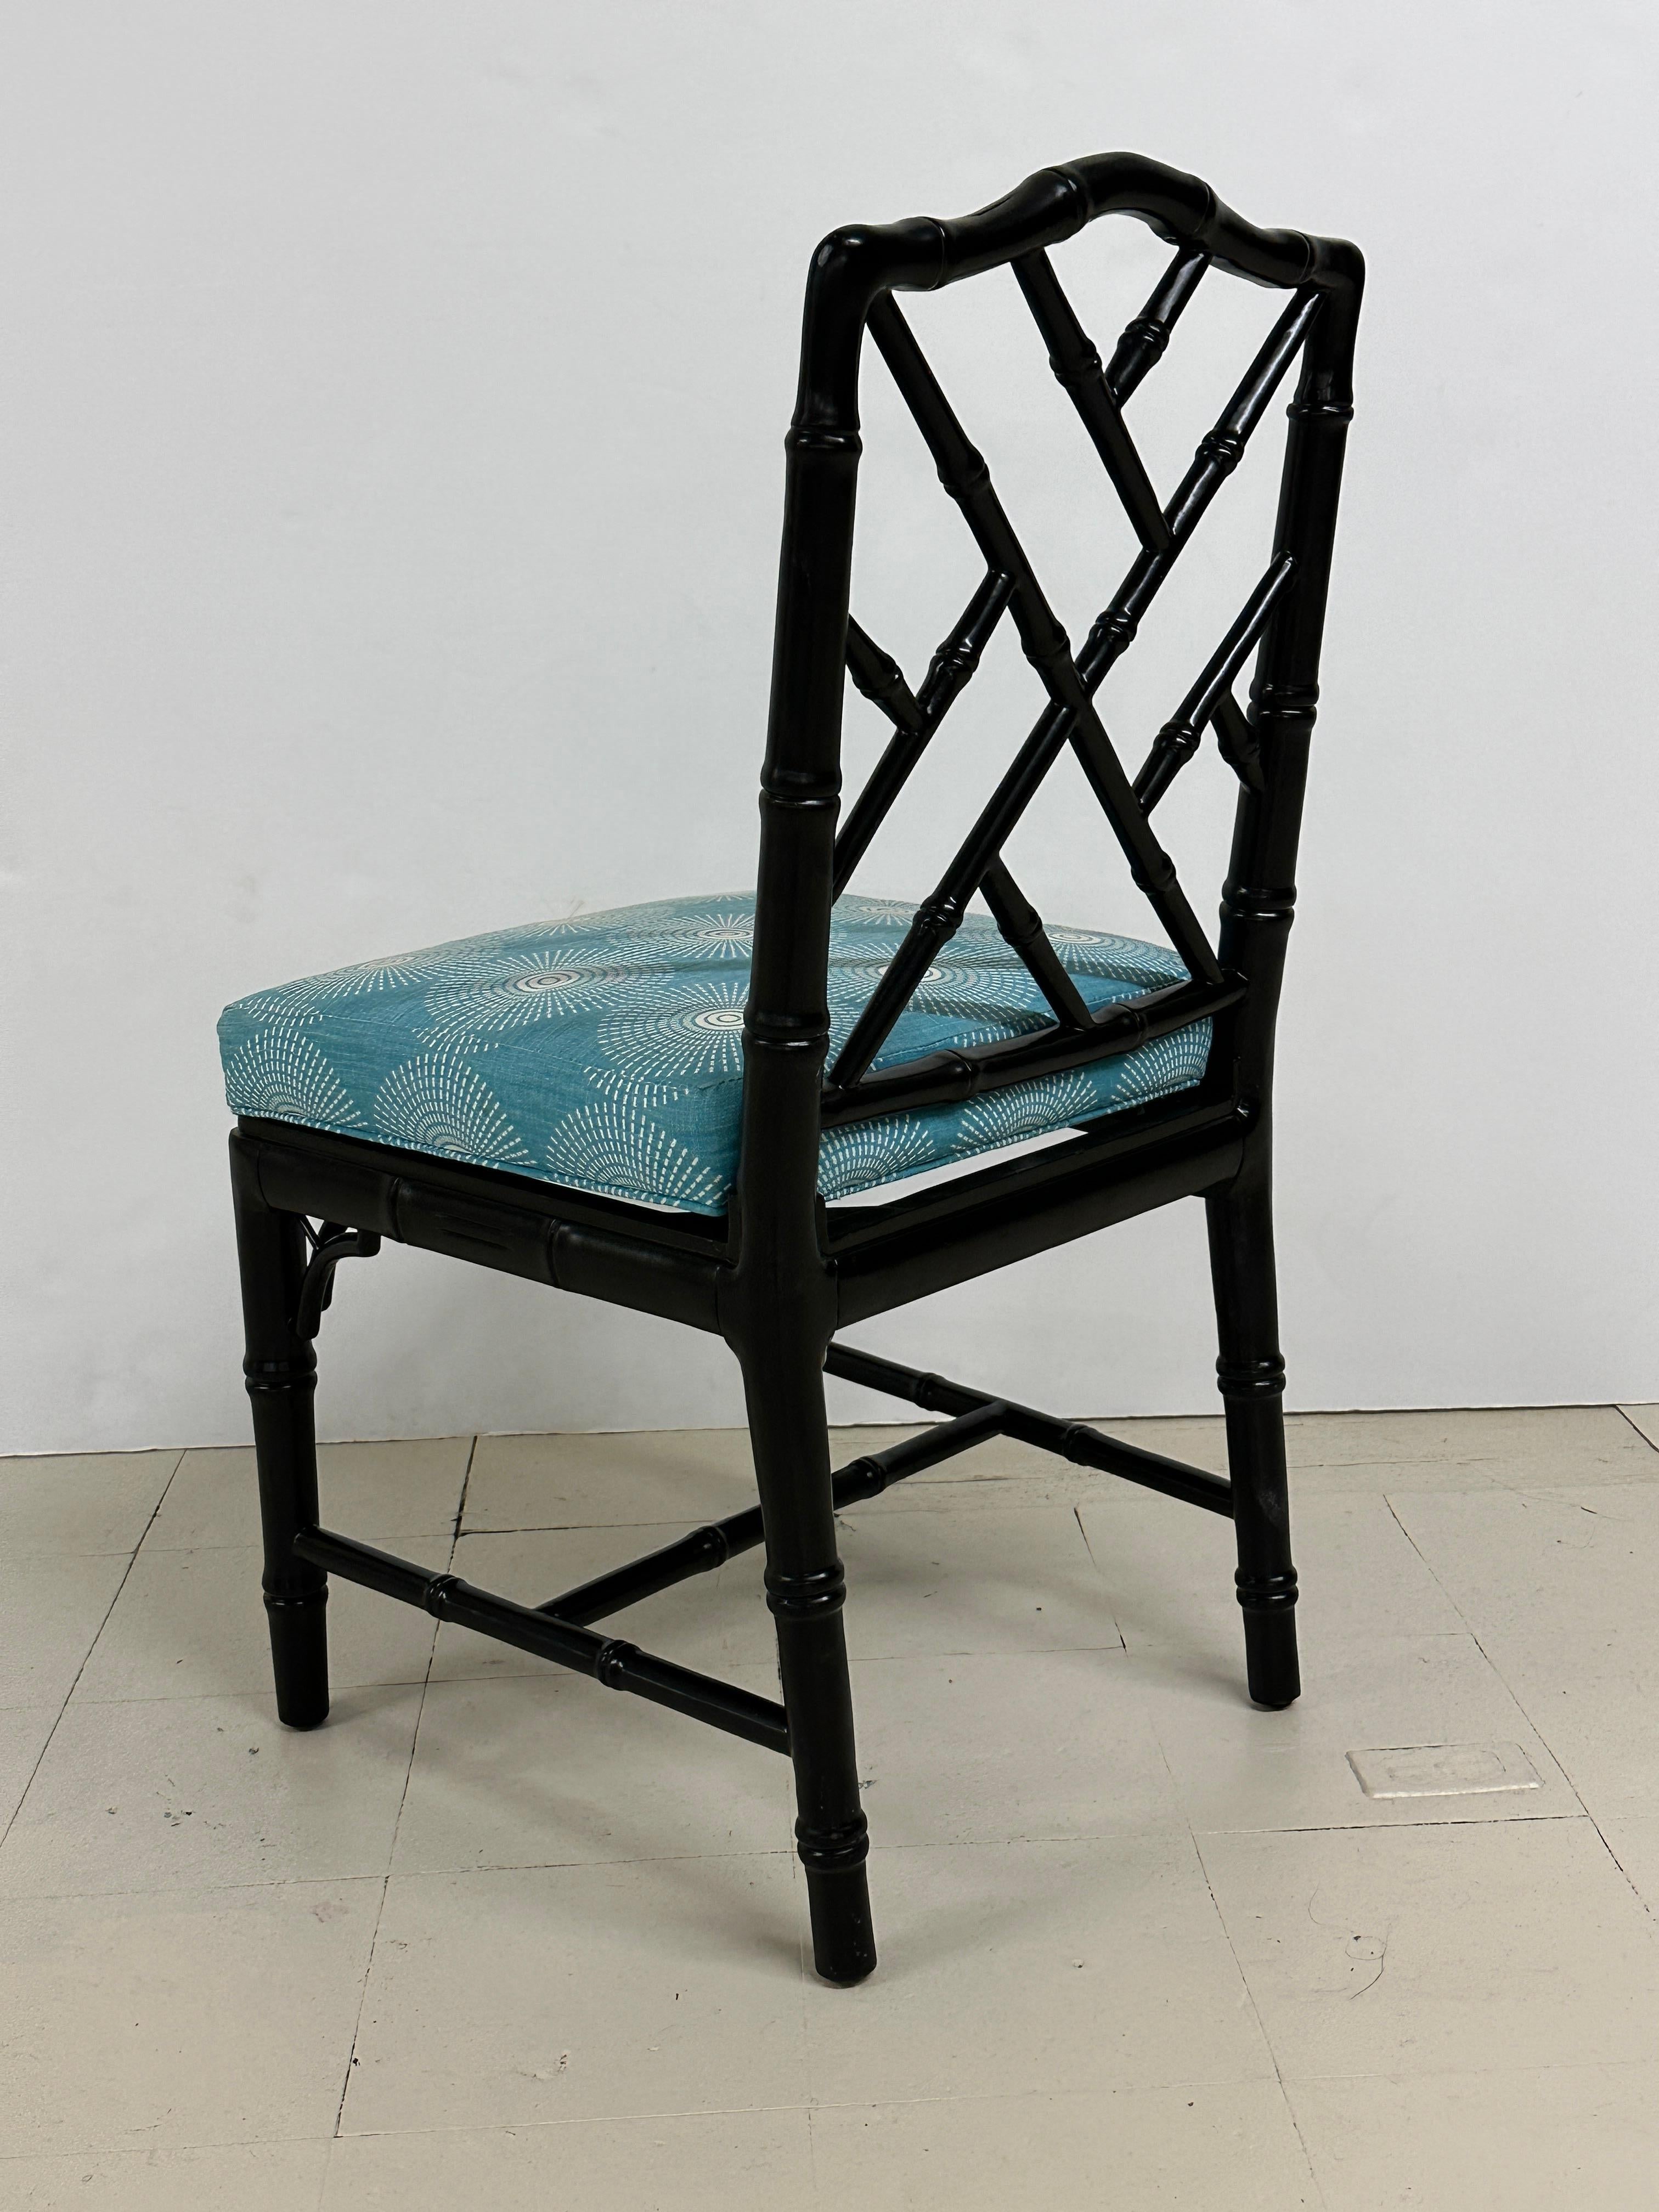 Lacquered Black Lacquer Chinese Chippendale Teal Chair by Jonathan Adler For Sale